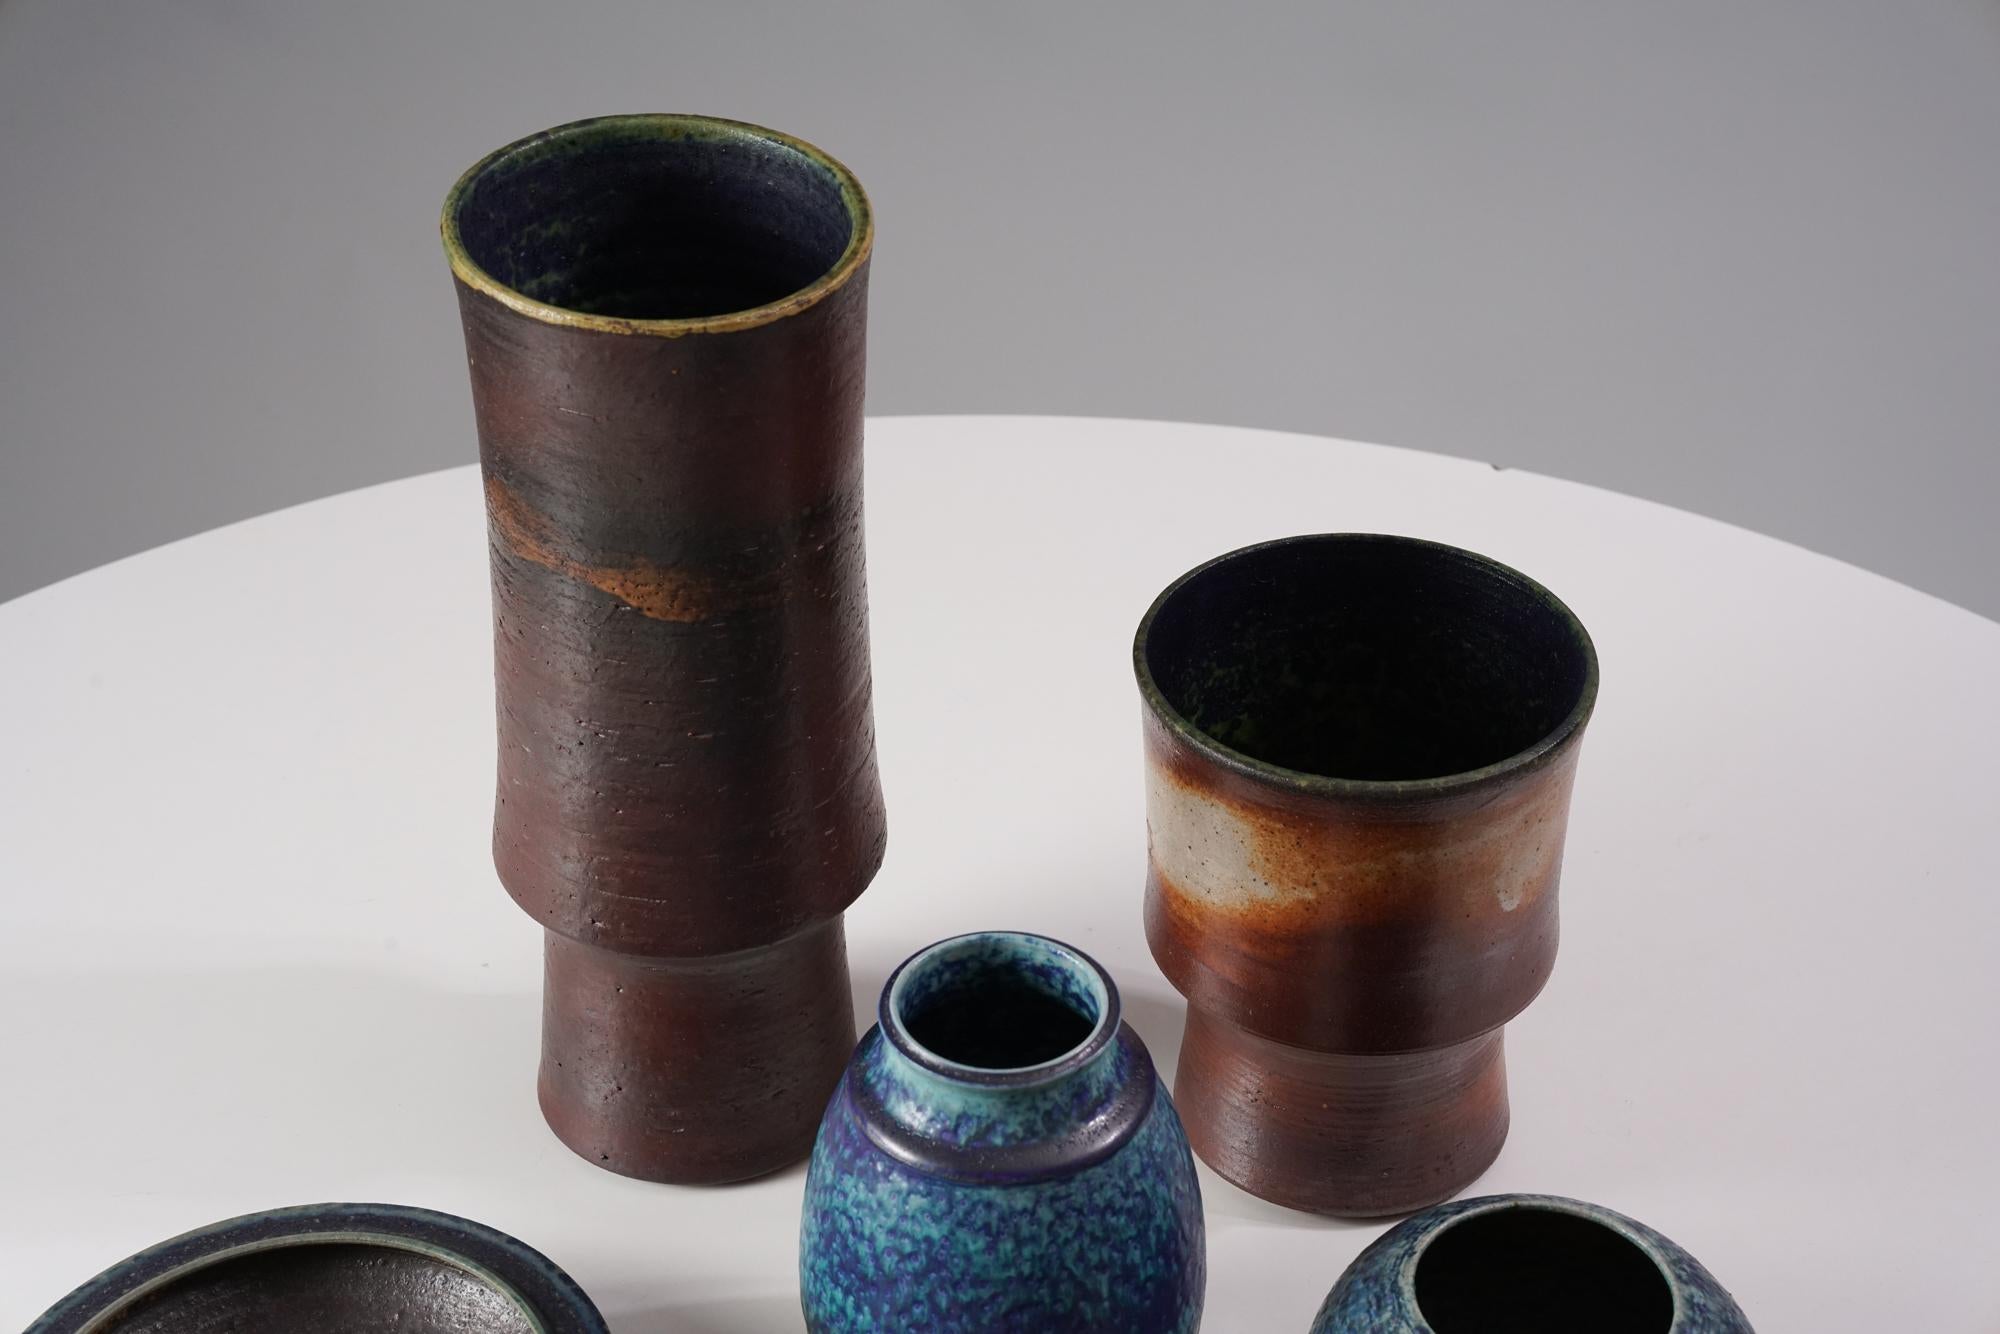 Set of ceramics by Liisa Hallamaa for Arabia from the 1960/1970s. The set includes three vases, two bowls and two little candleholders. Good vintage condition, minor patina and wear consistent with age and use. The ceramics are sold as a set.  

!!